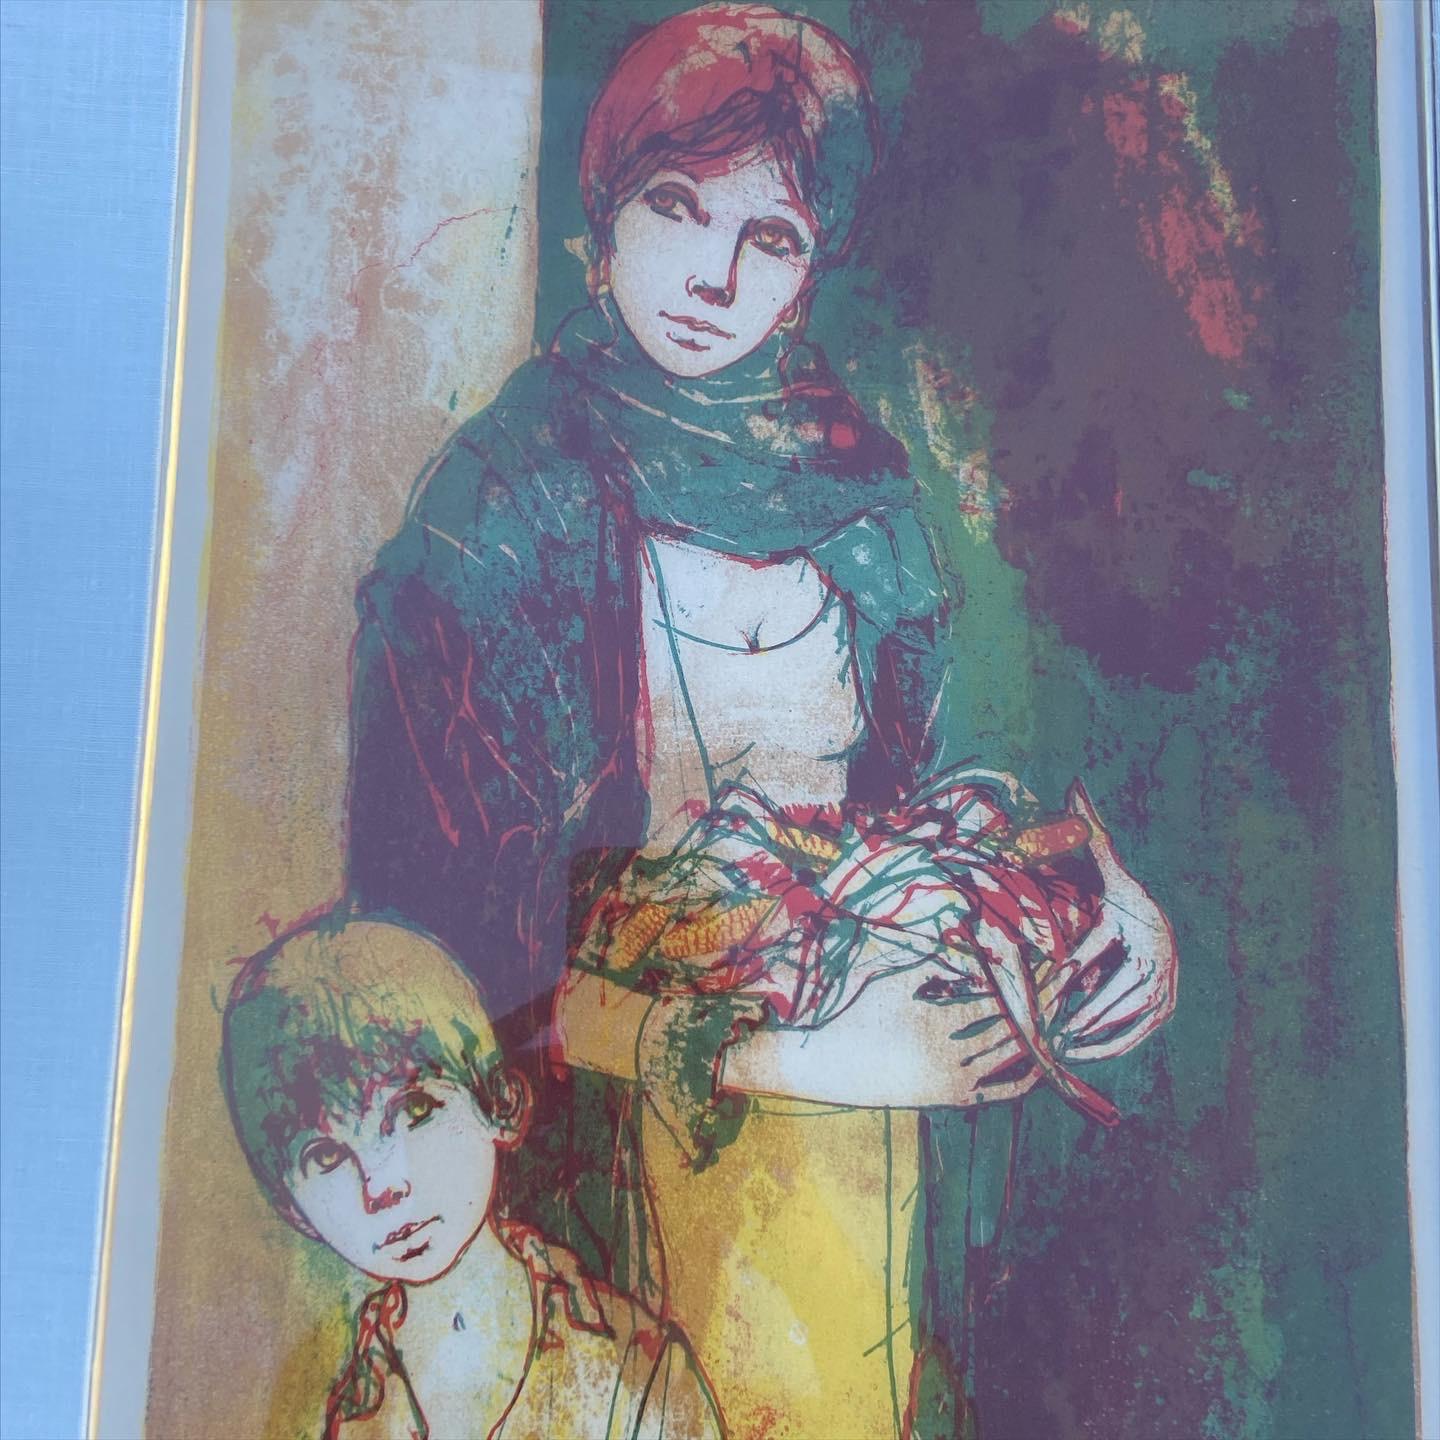 Limited Edition Signed and Framed Lithograph by Jean-Baptiste Valadié depicting a woman wearing a green shawl standing with her child.

Born in Brive-la-Gaillarde in 1933, Jean-Baptiste Valadié is a painter, sculptor, engraver, draftsman,